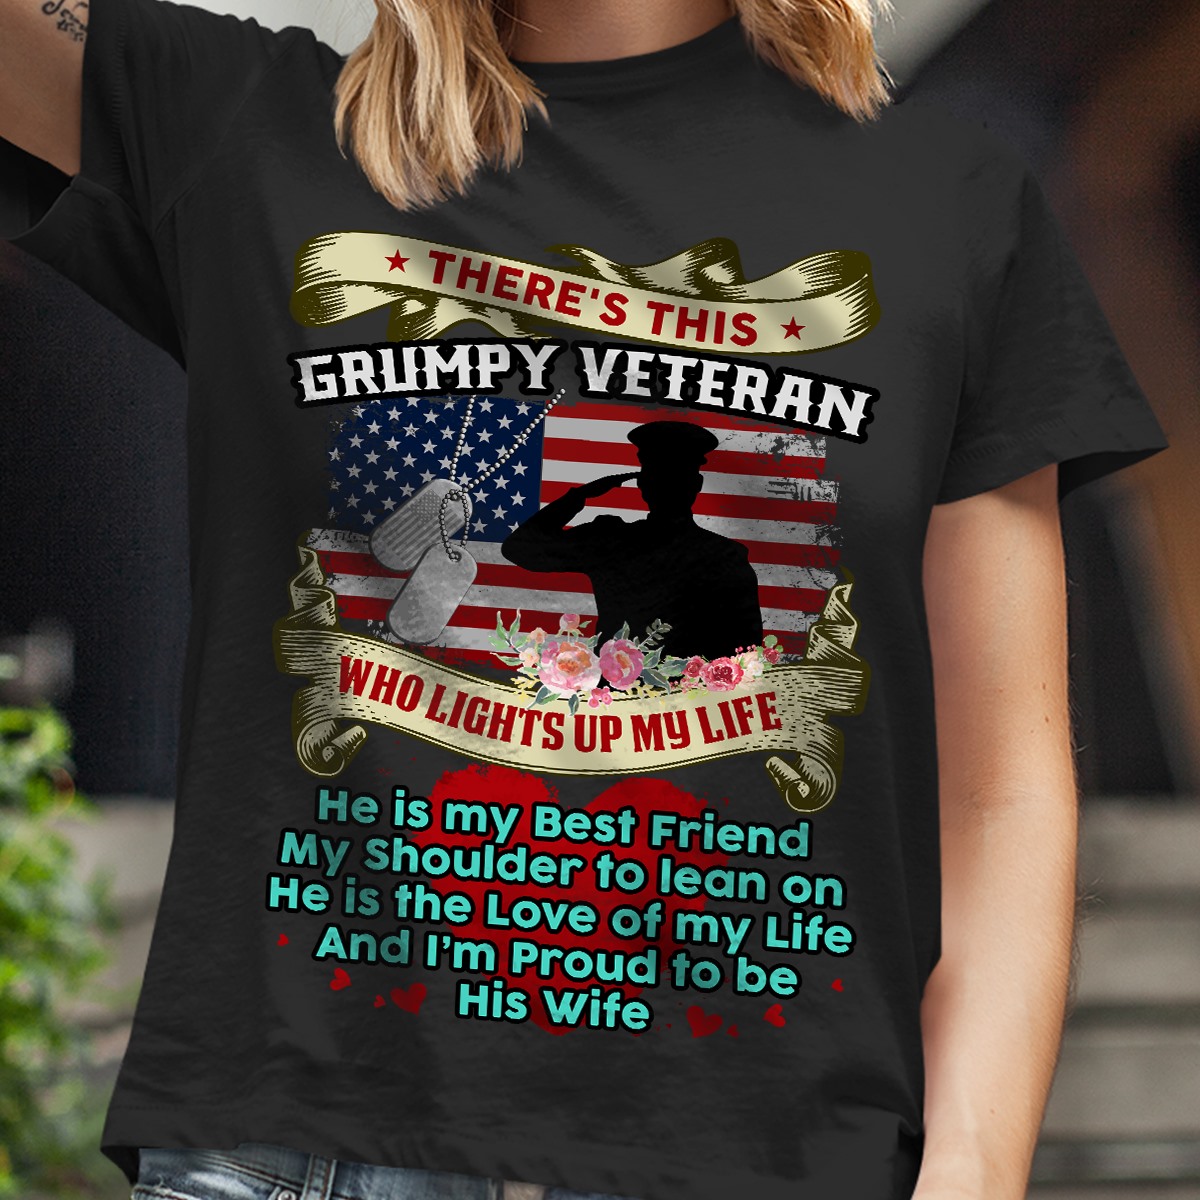 There's this grumpy veteran who lights up my life - America flag